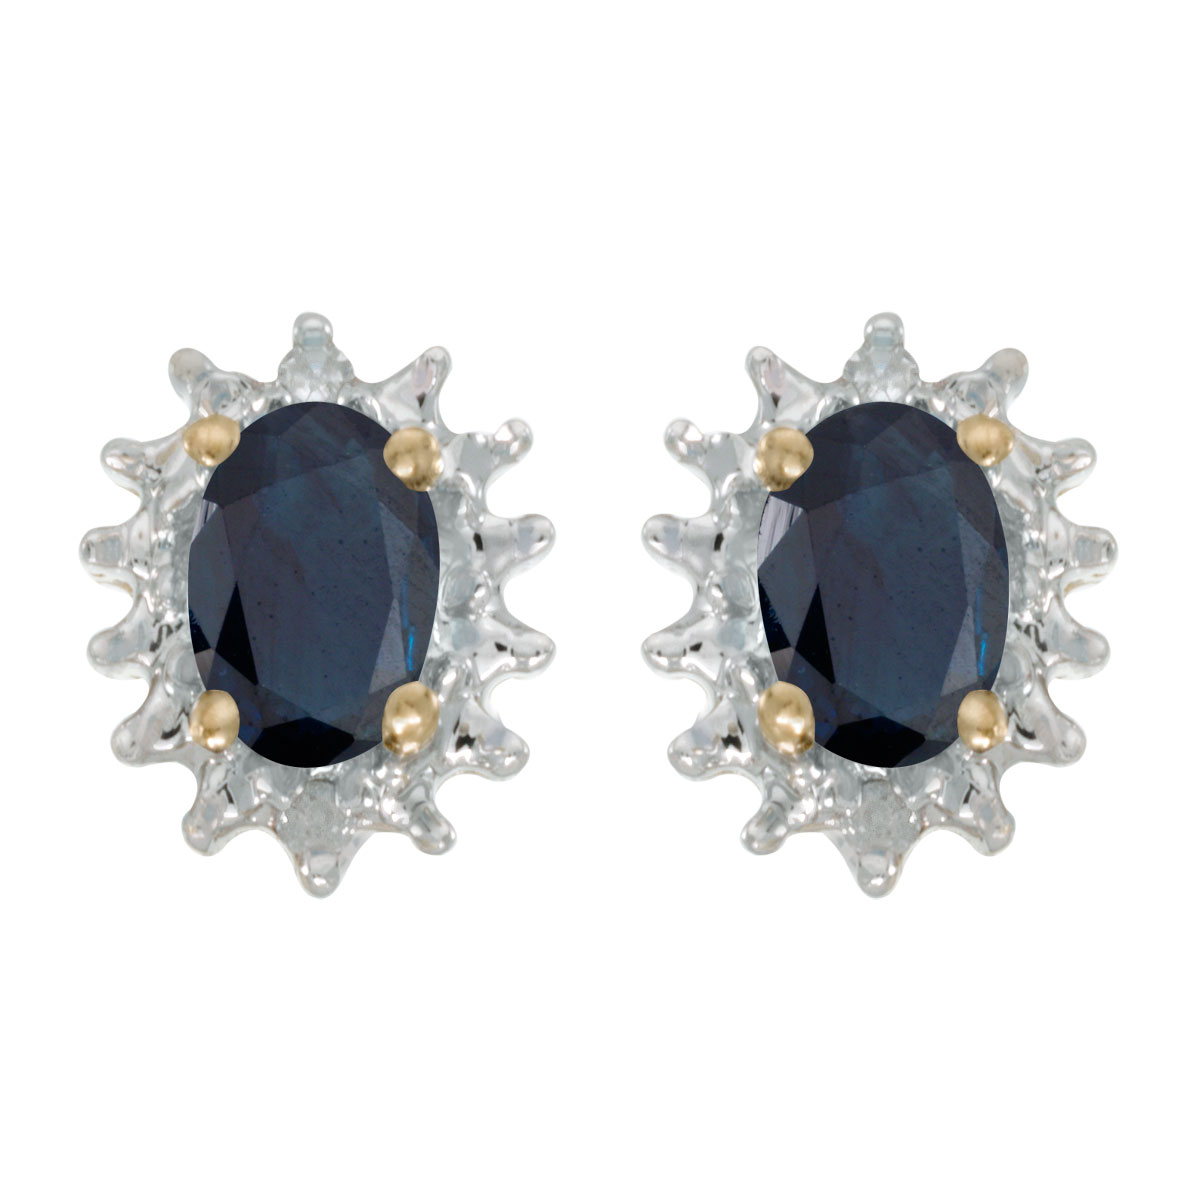 JCX1996: These 14k yellow gold oval sapphire and diamond earrings feature 6x4 mm genuine natural sapphires with a 0.78 ct total weight and .04 ct diamonds.